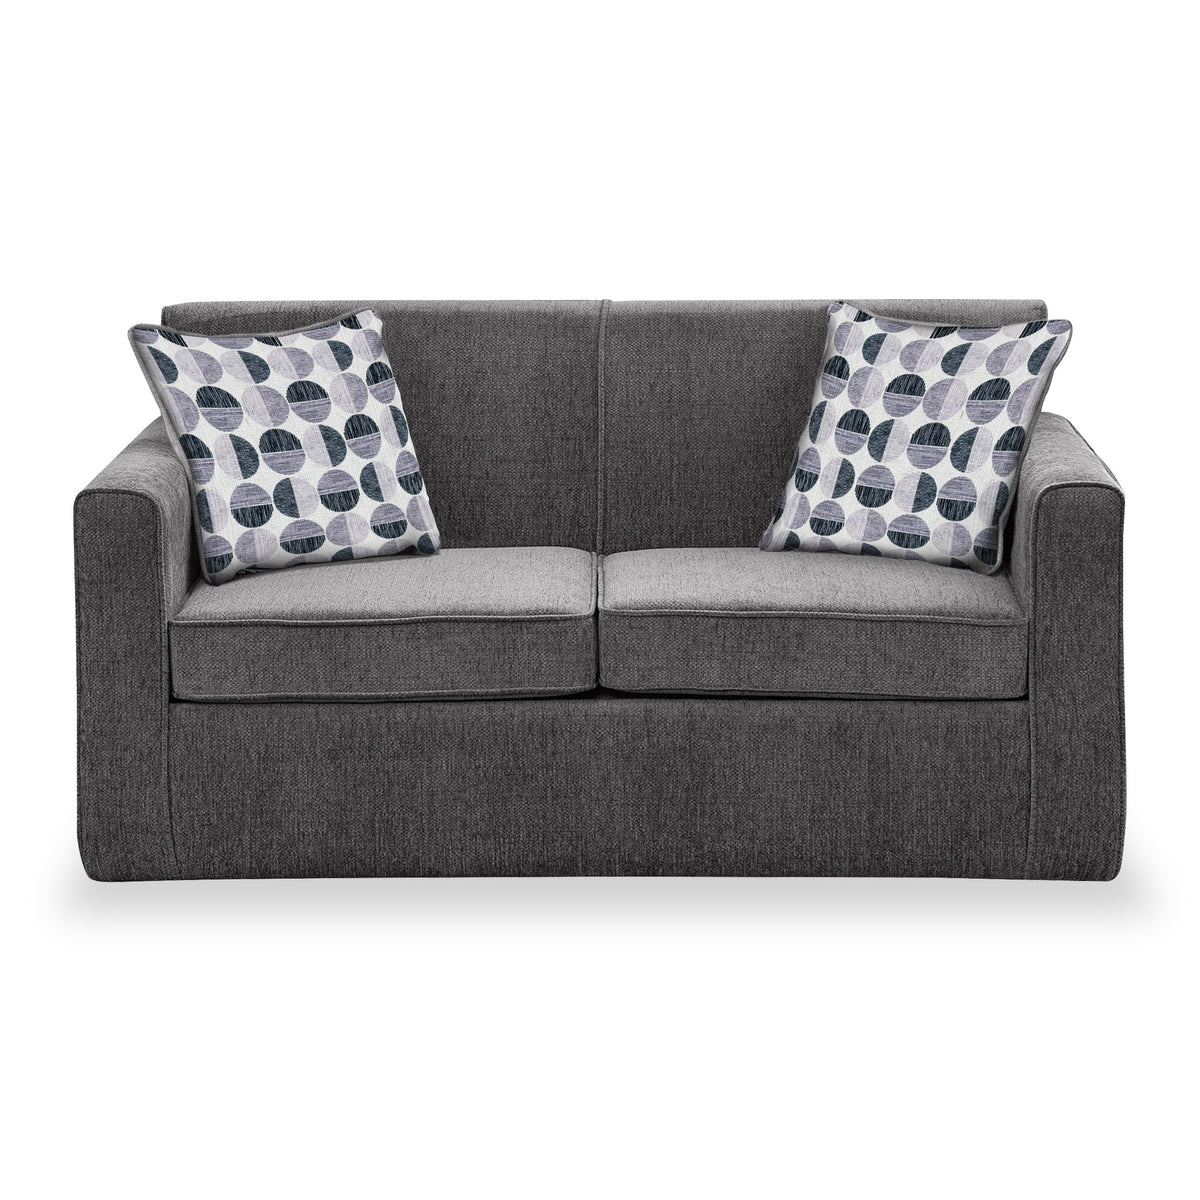 Welton Charcoal Soft Weave 2 Seater Sofa Bed with Refus Mono Cushions